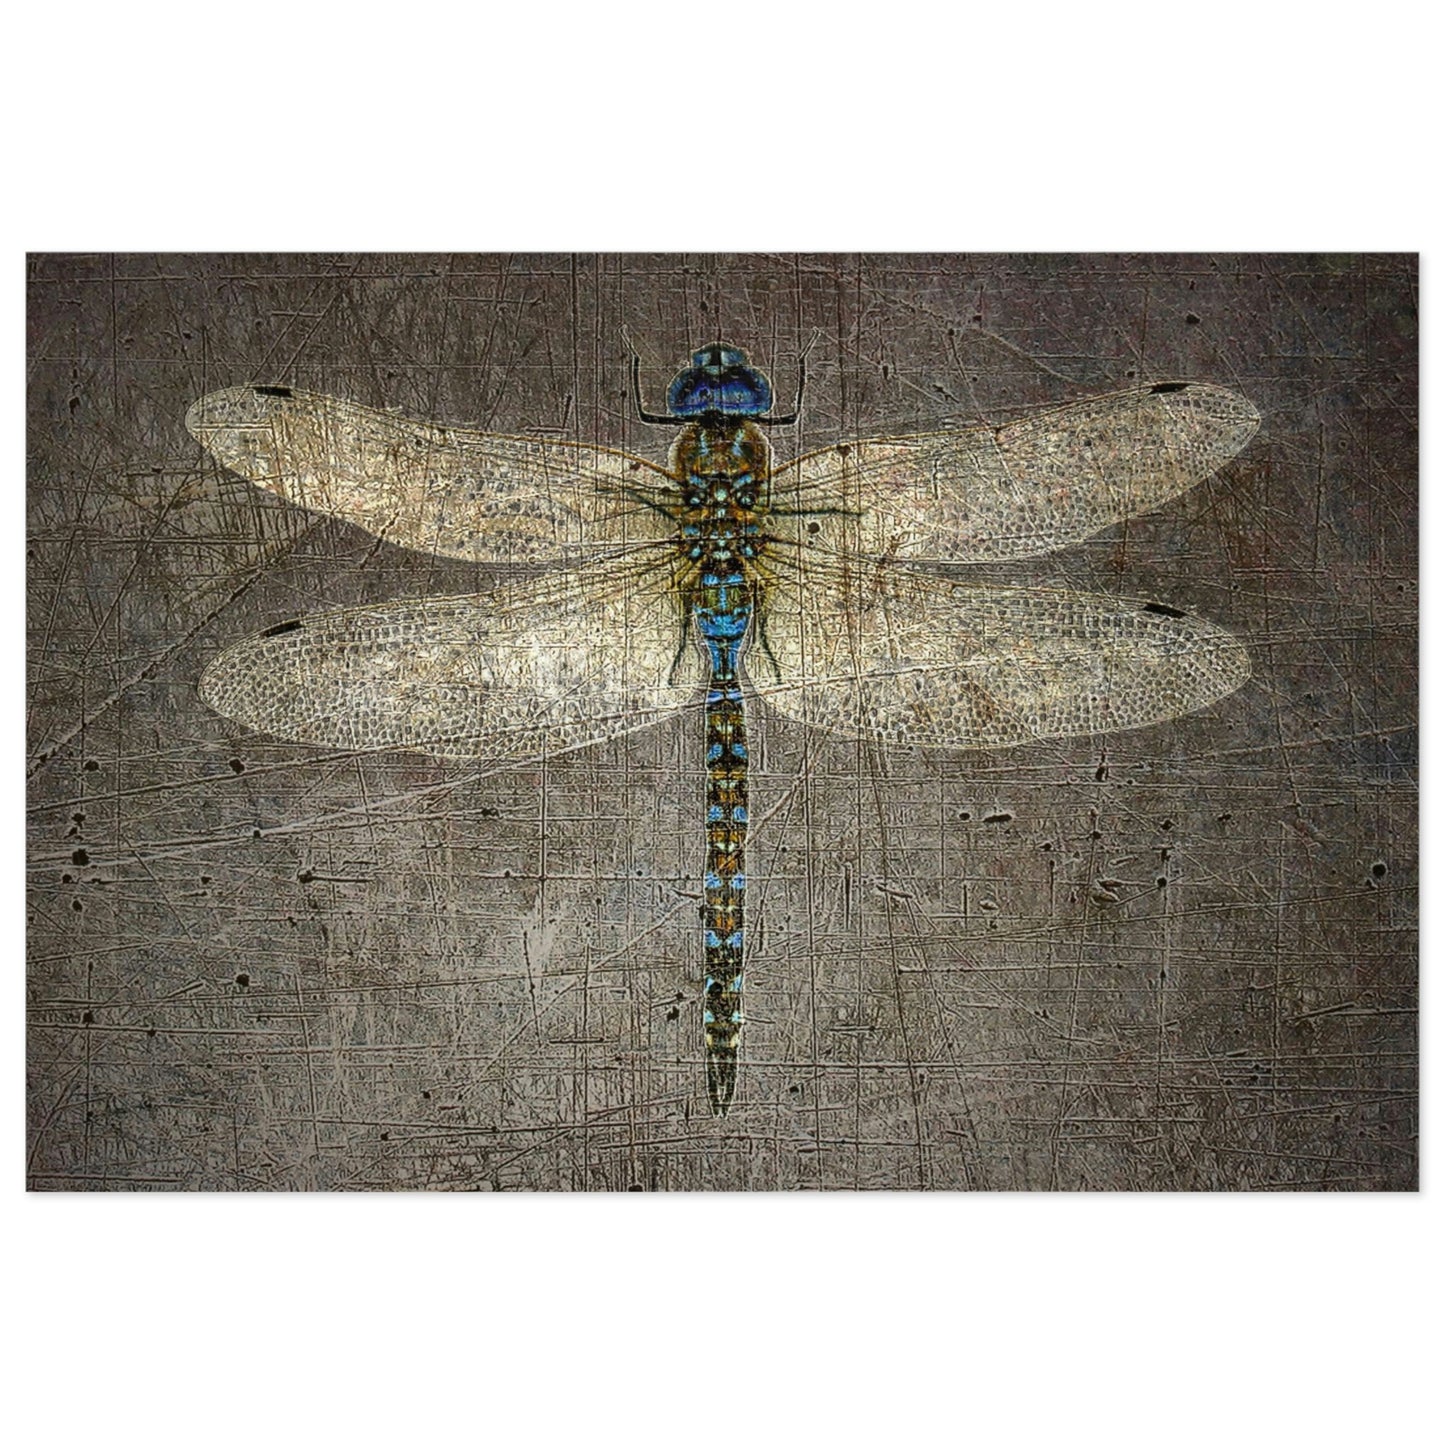 Dragonfly on Distressed Granite Background Puzzle 1000 pieces